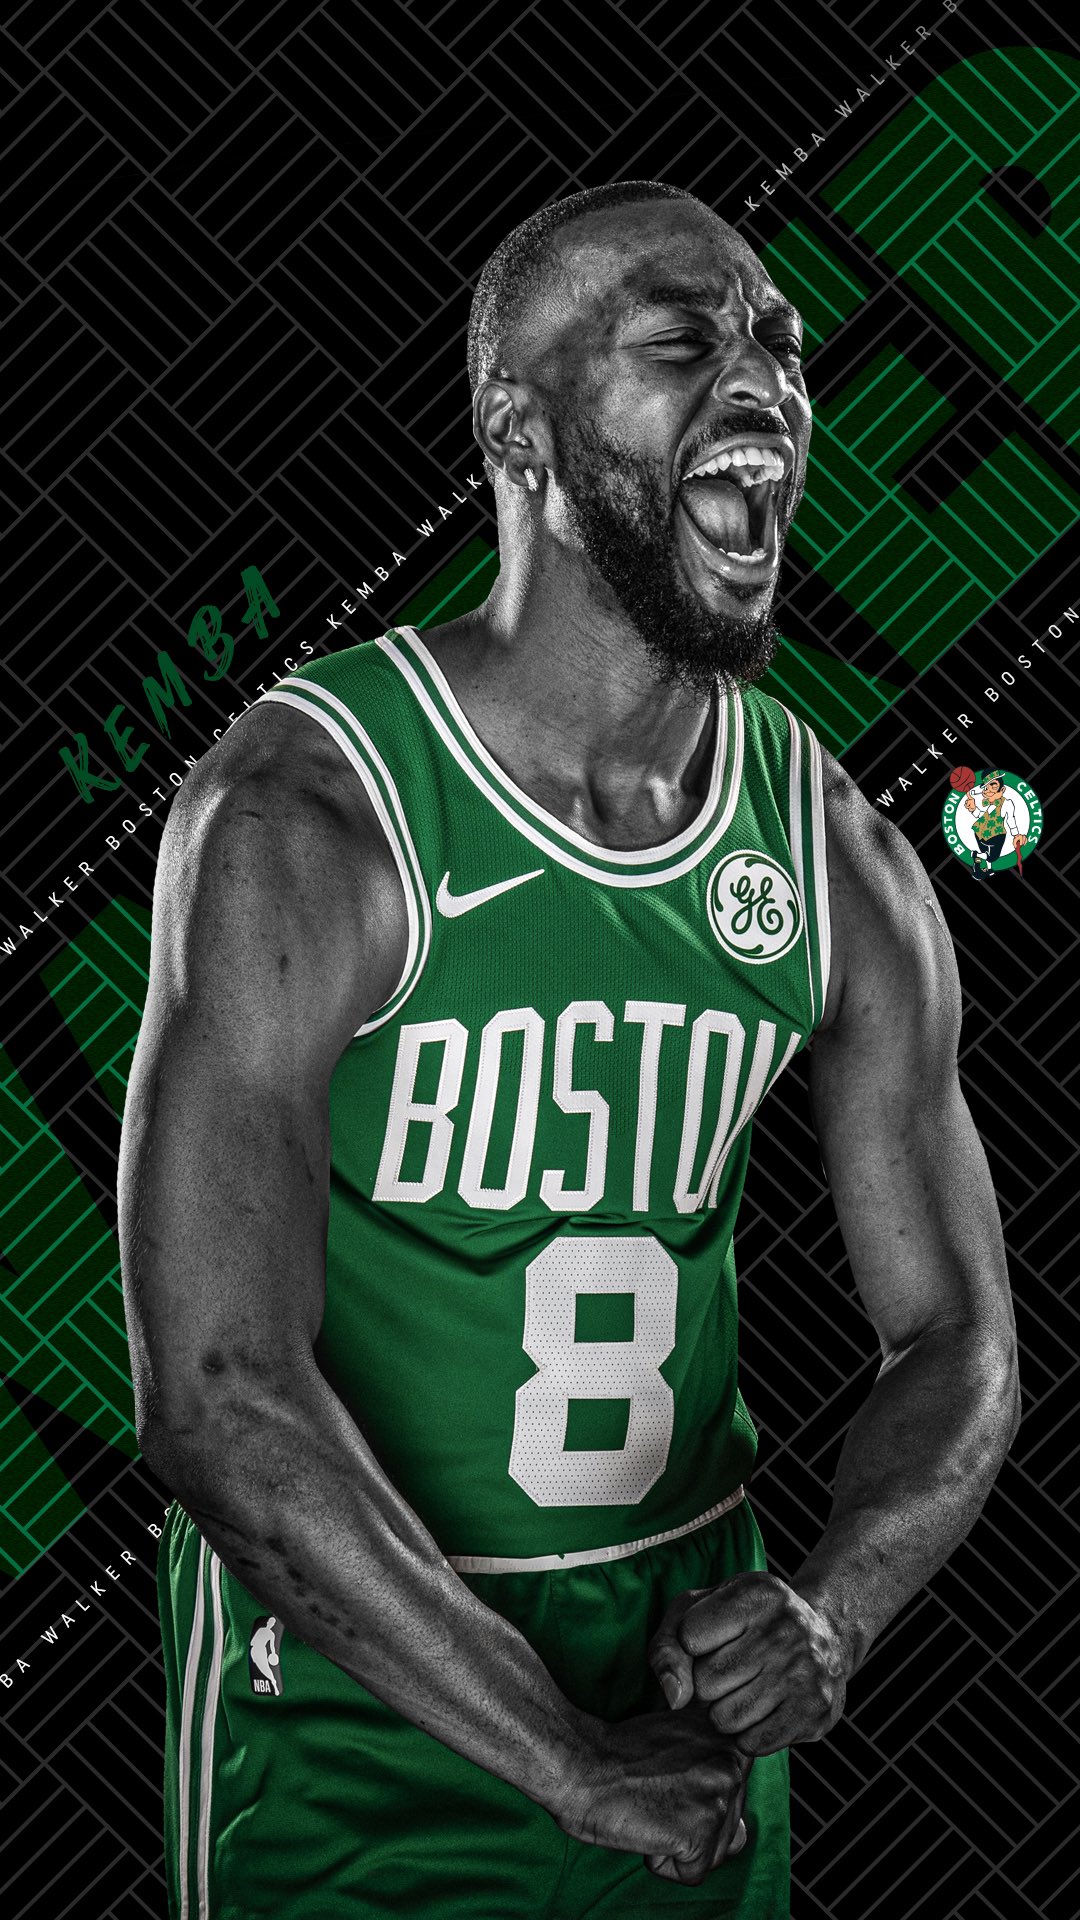 Free download download this iphone wallpaper you can download our iphone  wallpapers 324x576 for your Desktop Mobile  Tablet  Explore 42 Boston Celtics  iPhone Wallpaper  Boston Celtics Desktop Wallpaper Boston